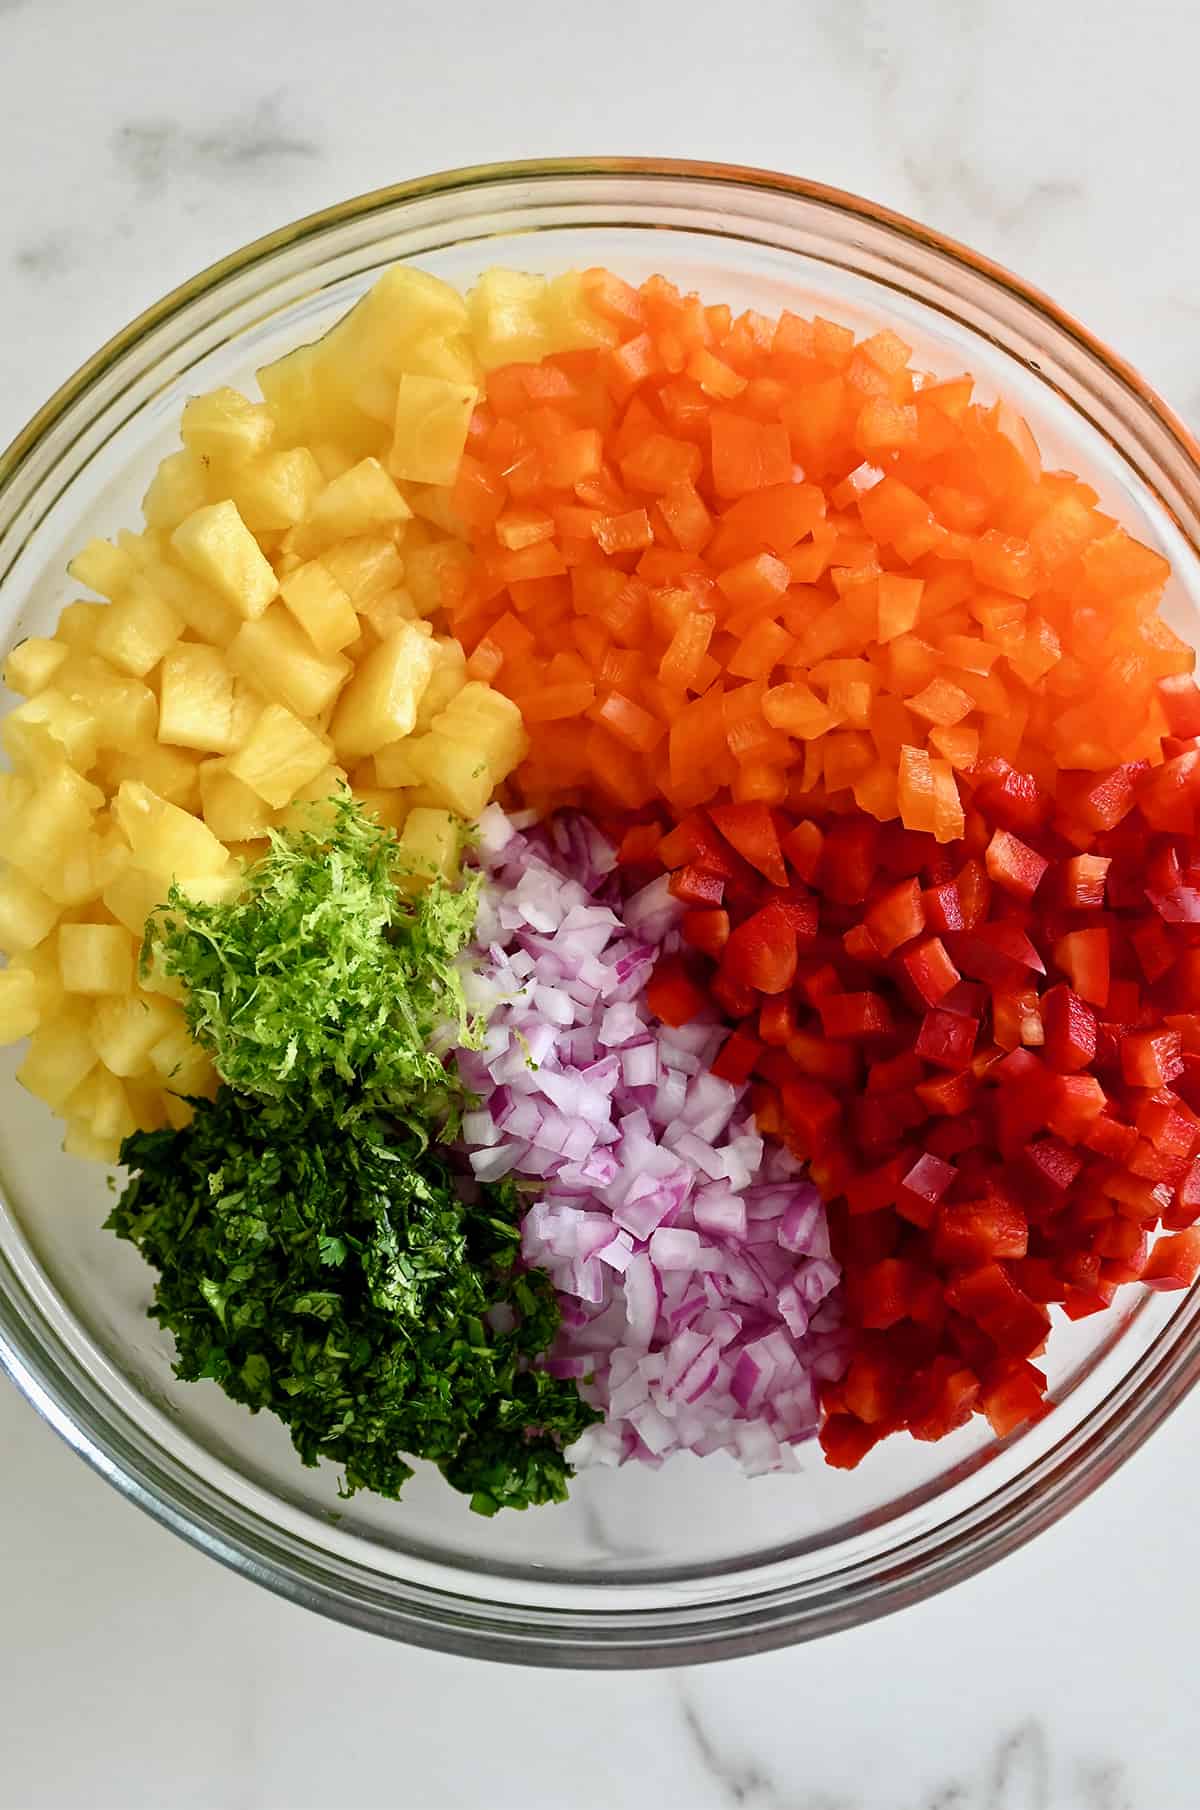 A large clear bowl containing chopped orange and red bell peppers, diced red onion, minced cilantro, lime zest and small pieces of pineapple.